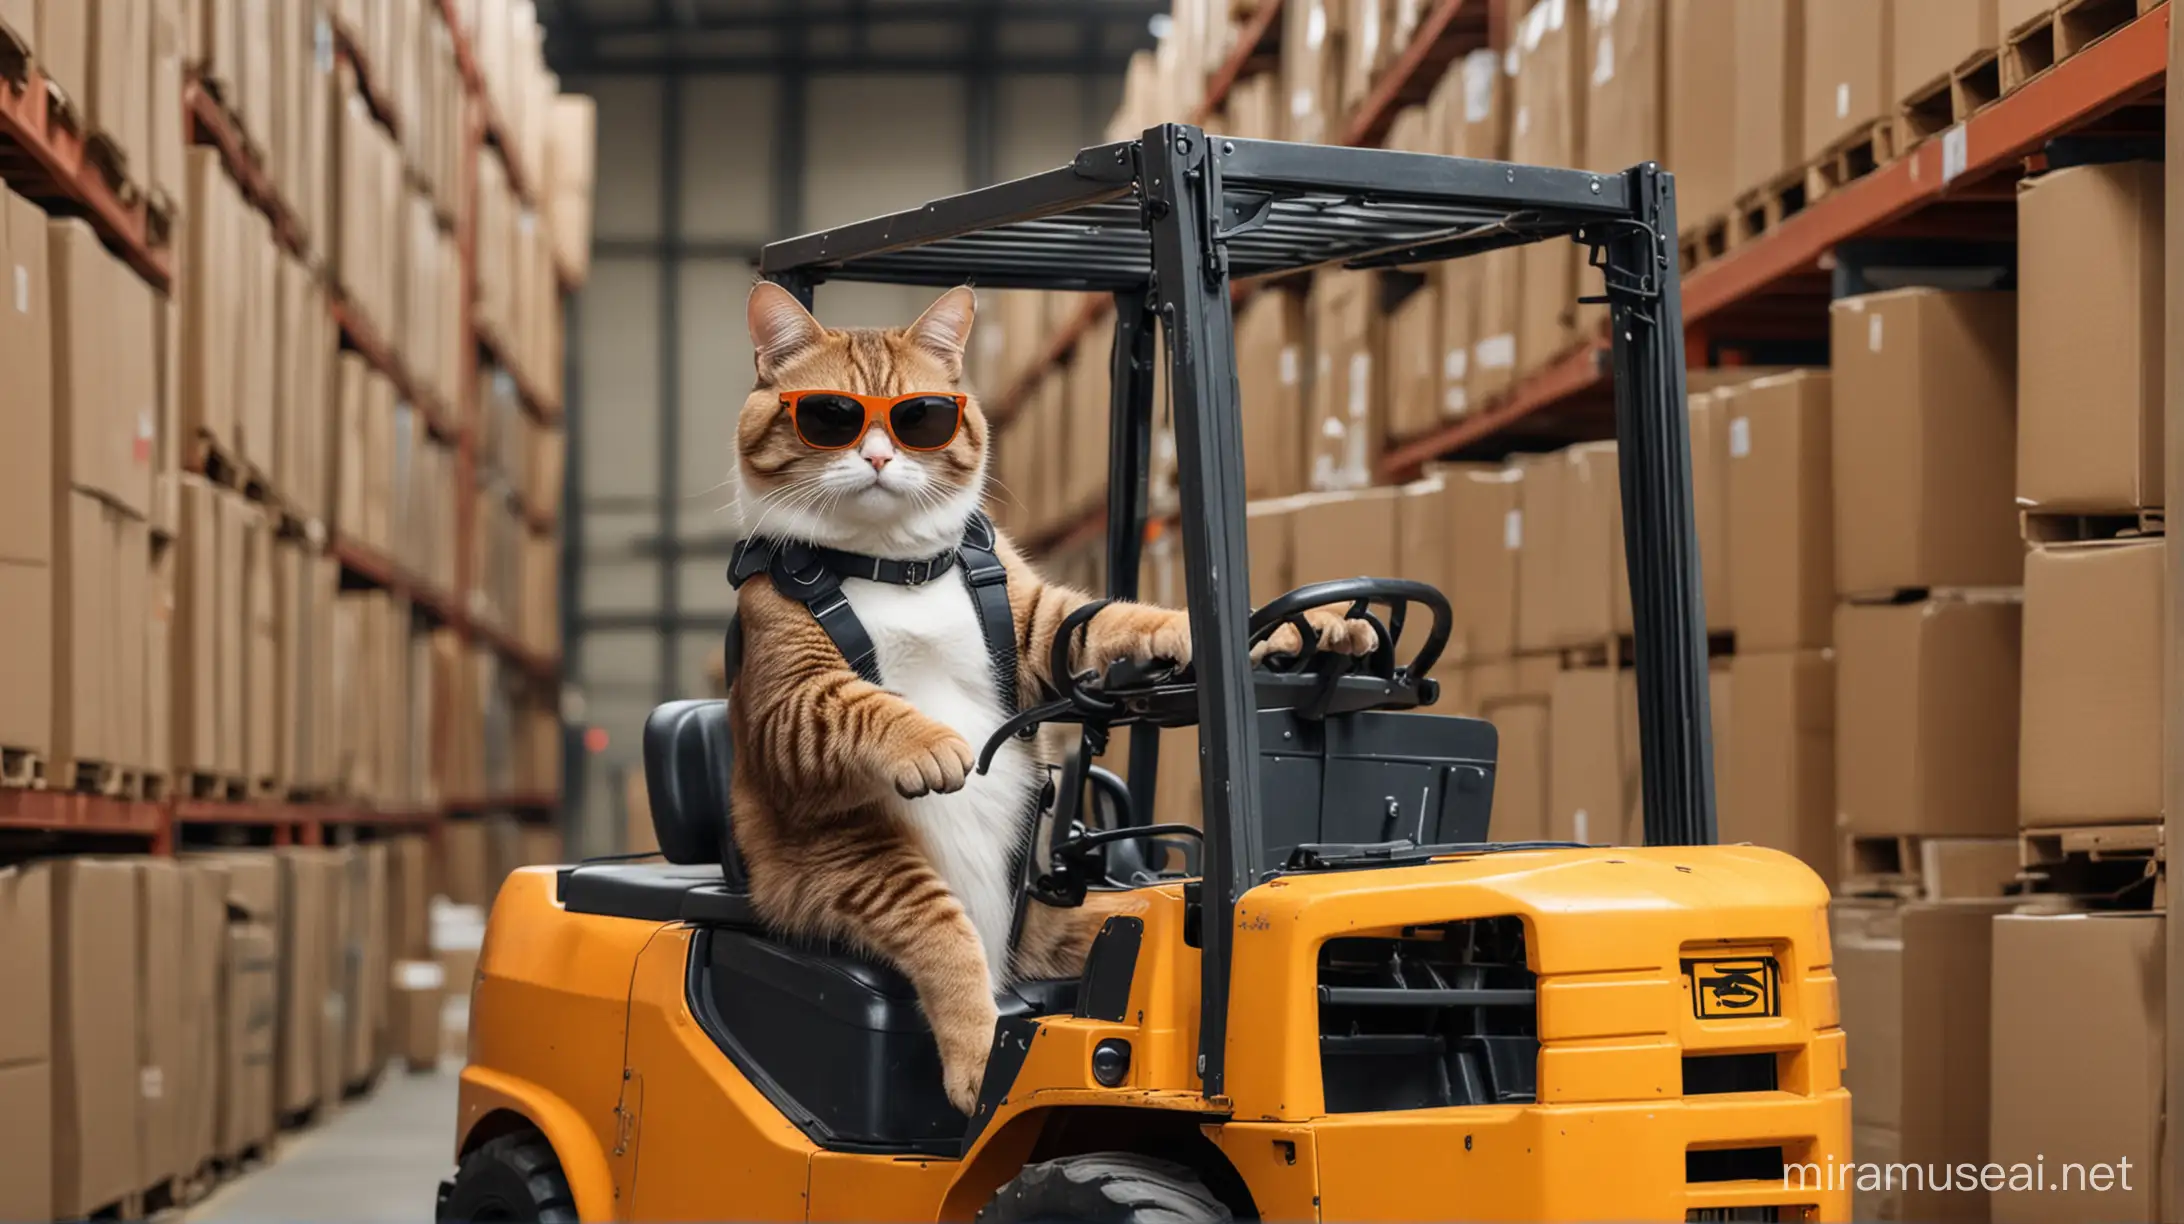 Cool Cat in Sunglasses Riding Forklift in Warehouse